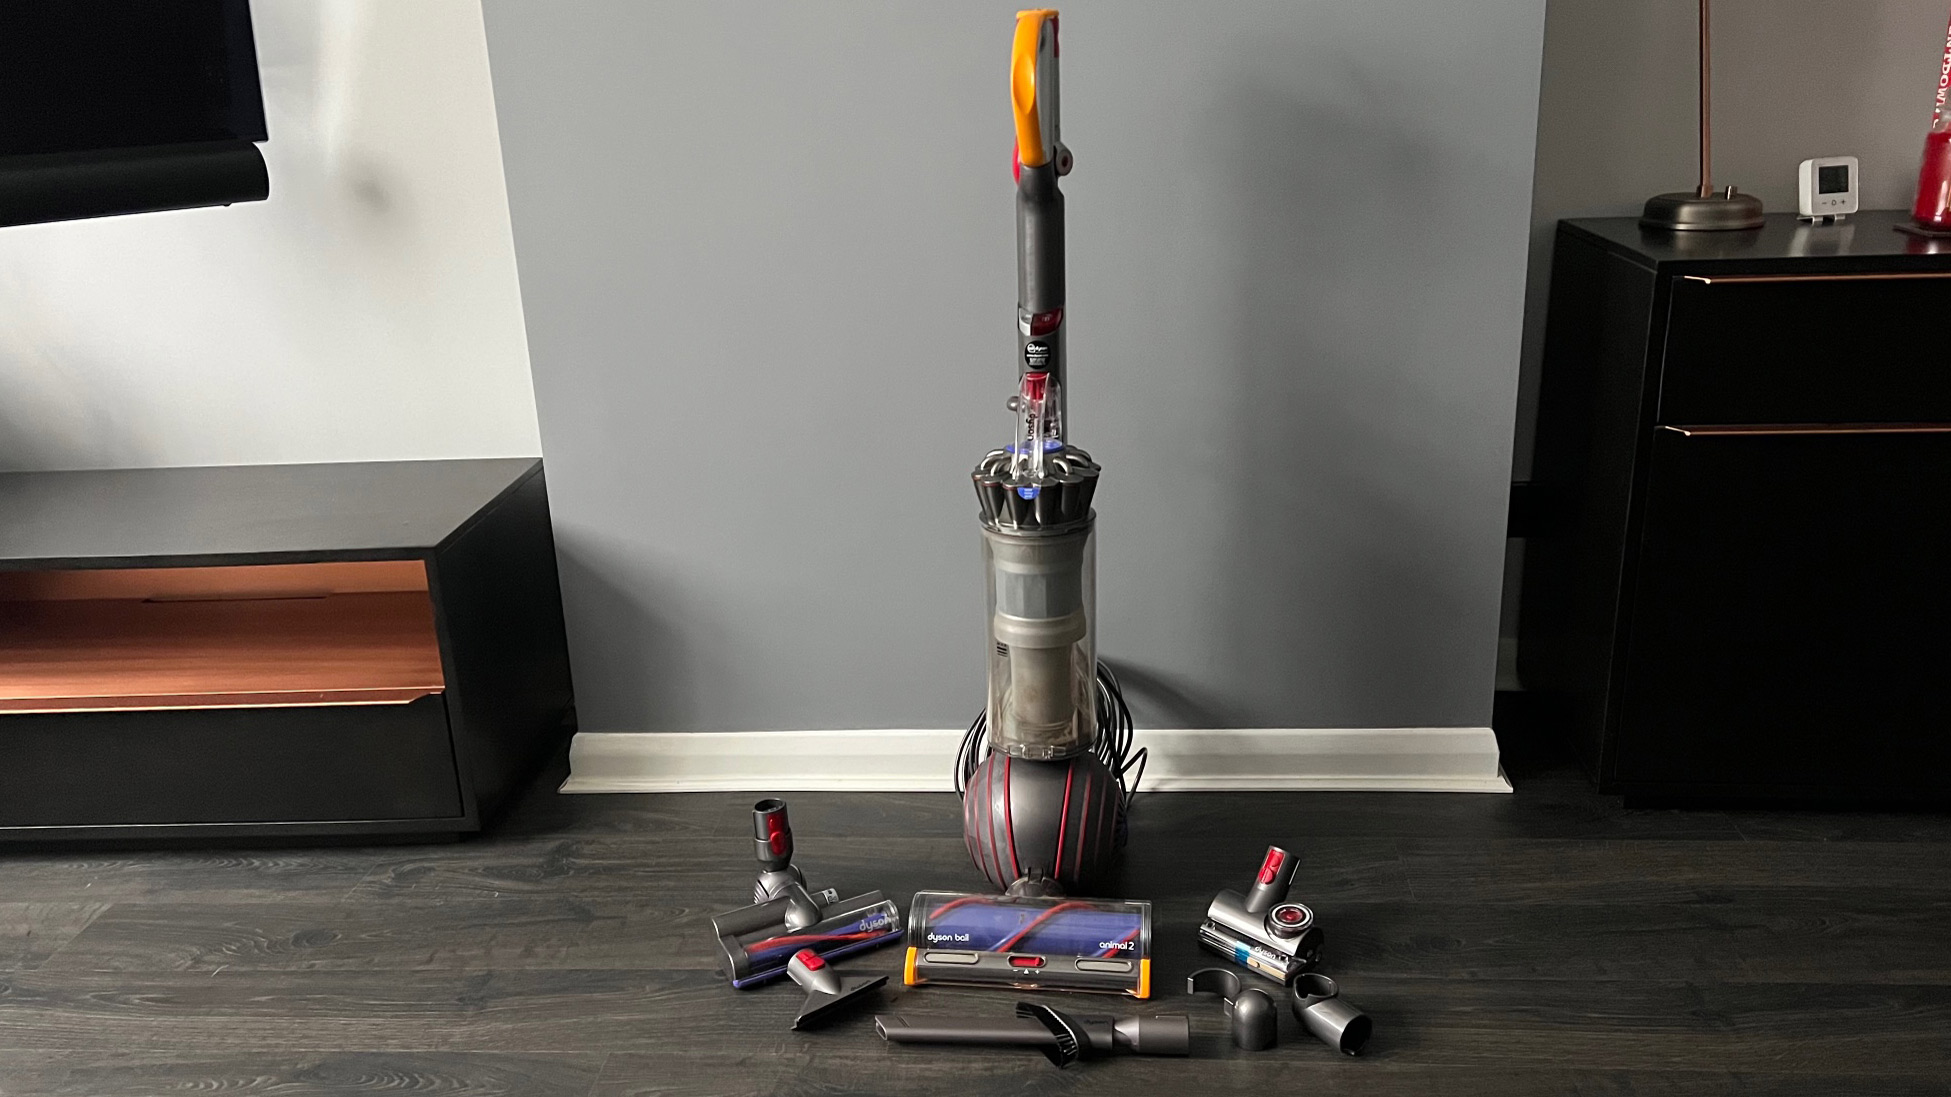 The Dyson Ball Animal 2 with all its accessories